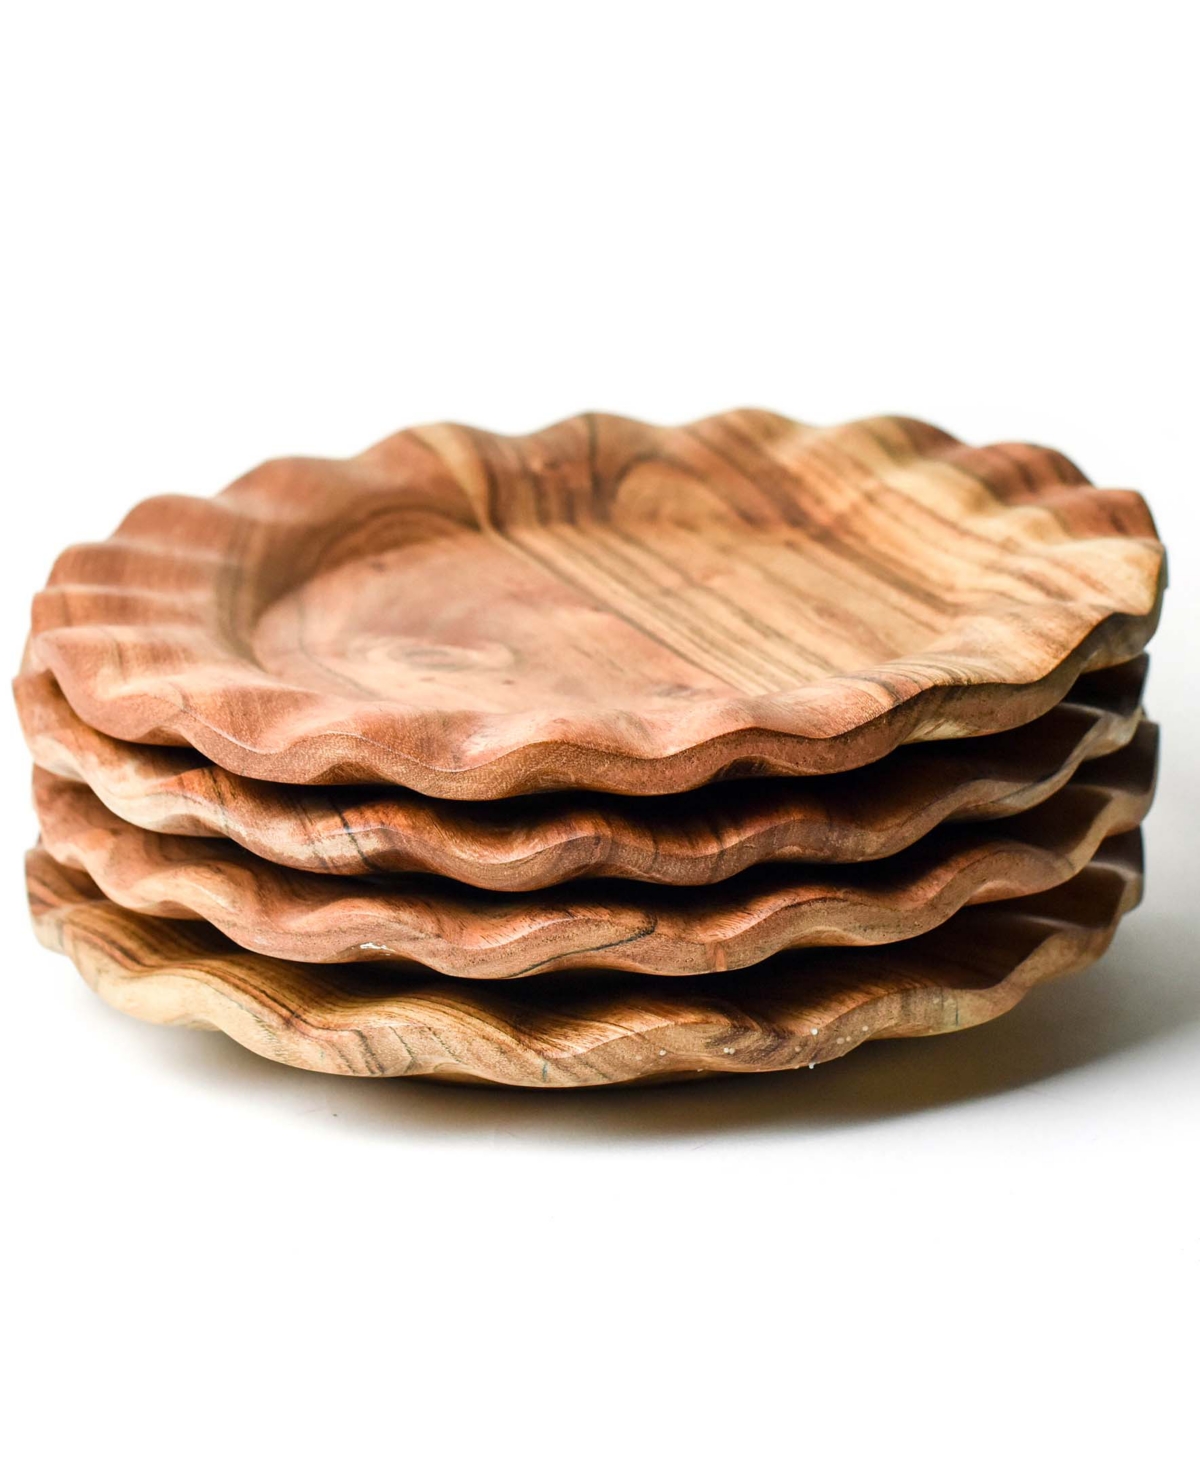 Fundamental Wood 11" Ruffle Dinner Plate Set of 4, Service for 4 - Brown